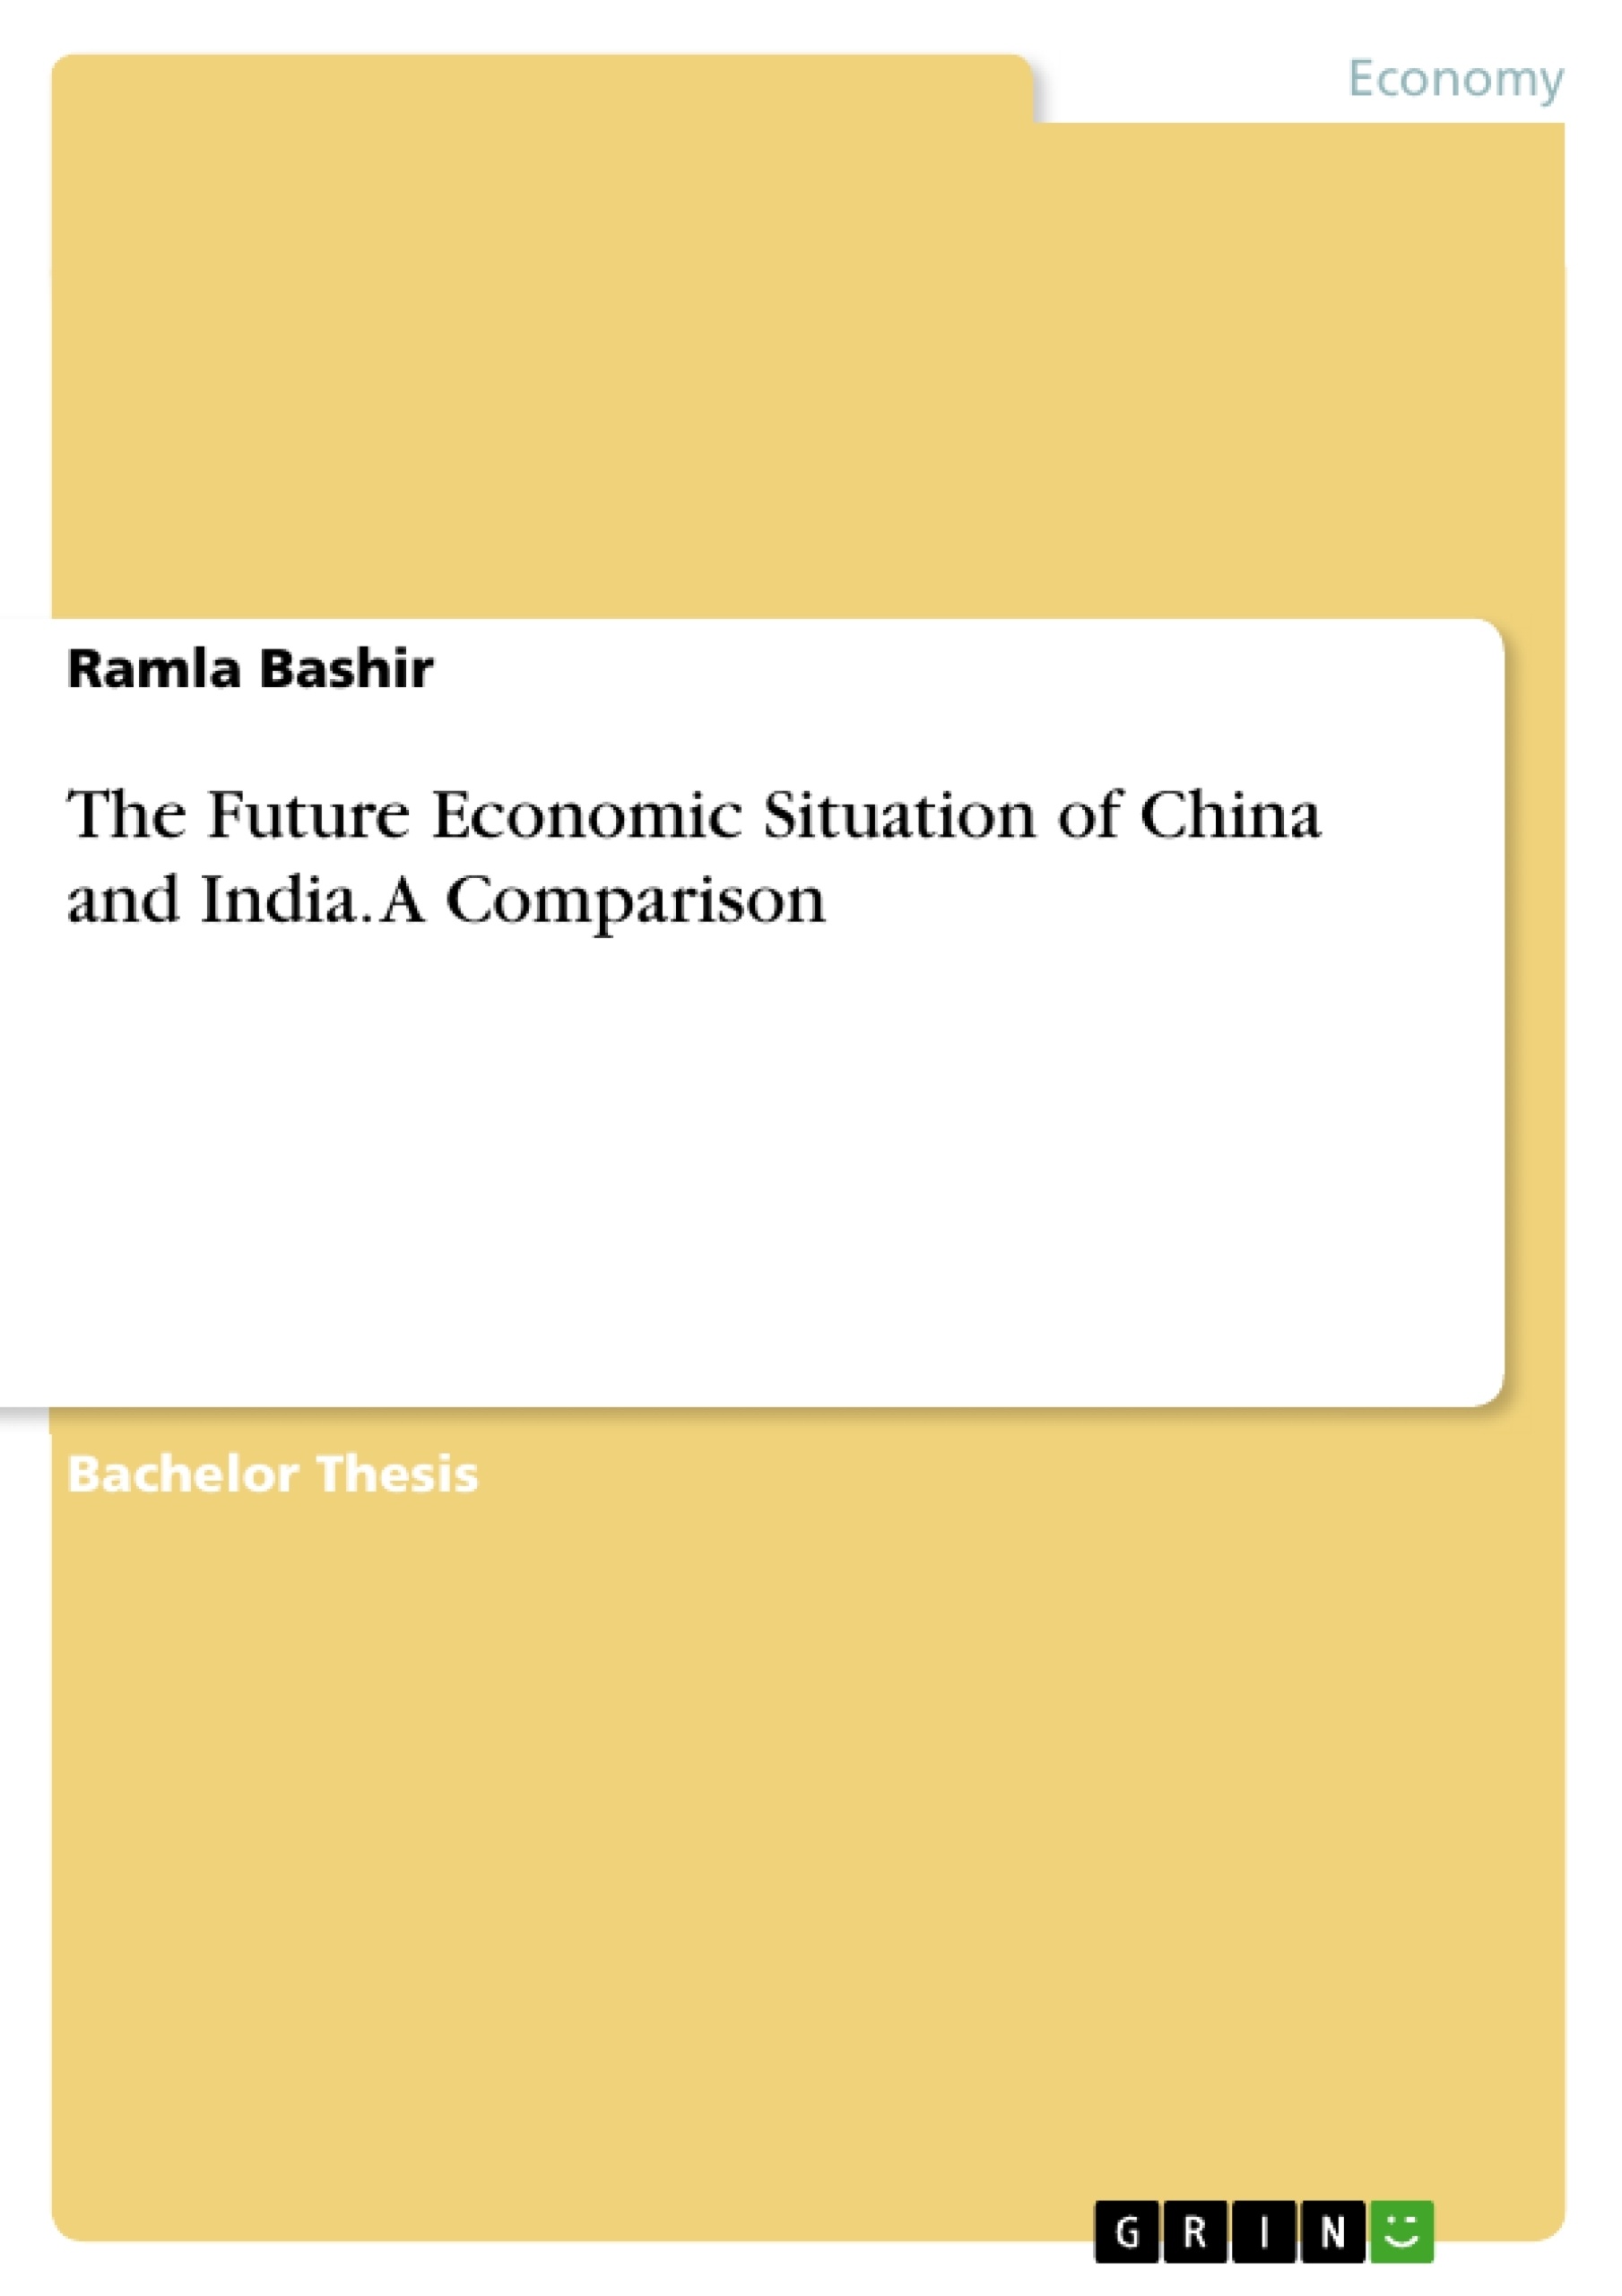 Title: The Future Economic Situation of China and India. A Comparison